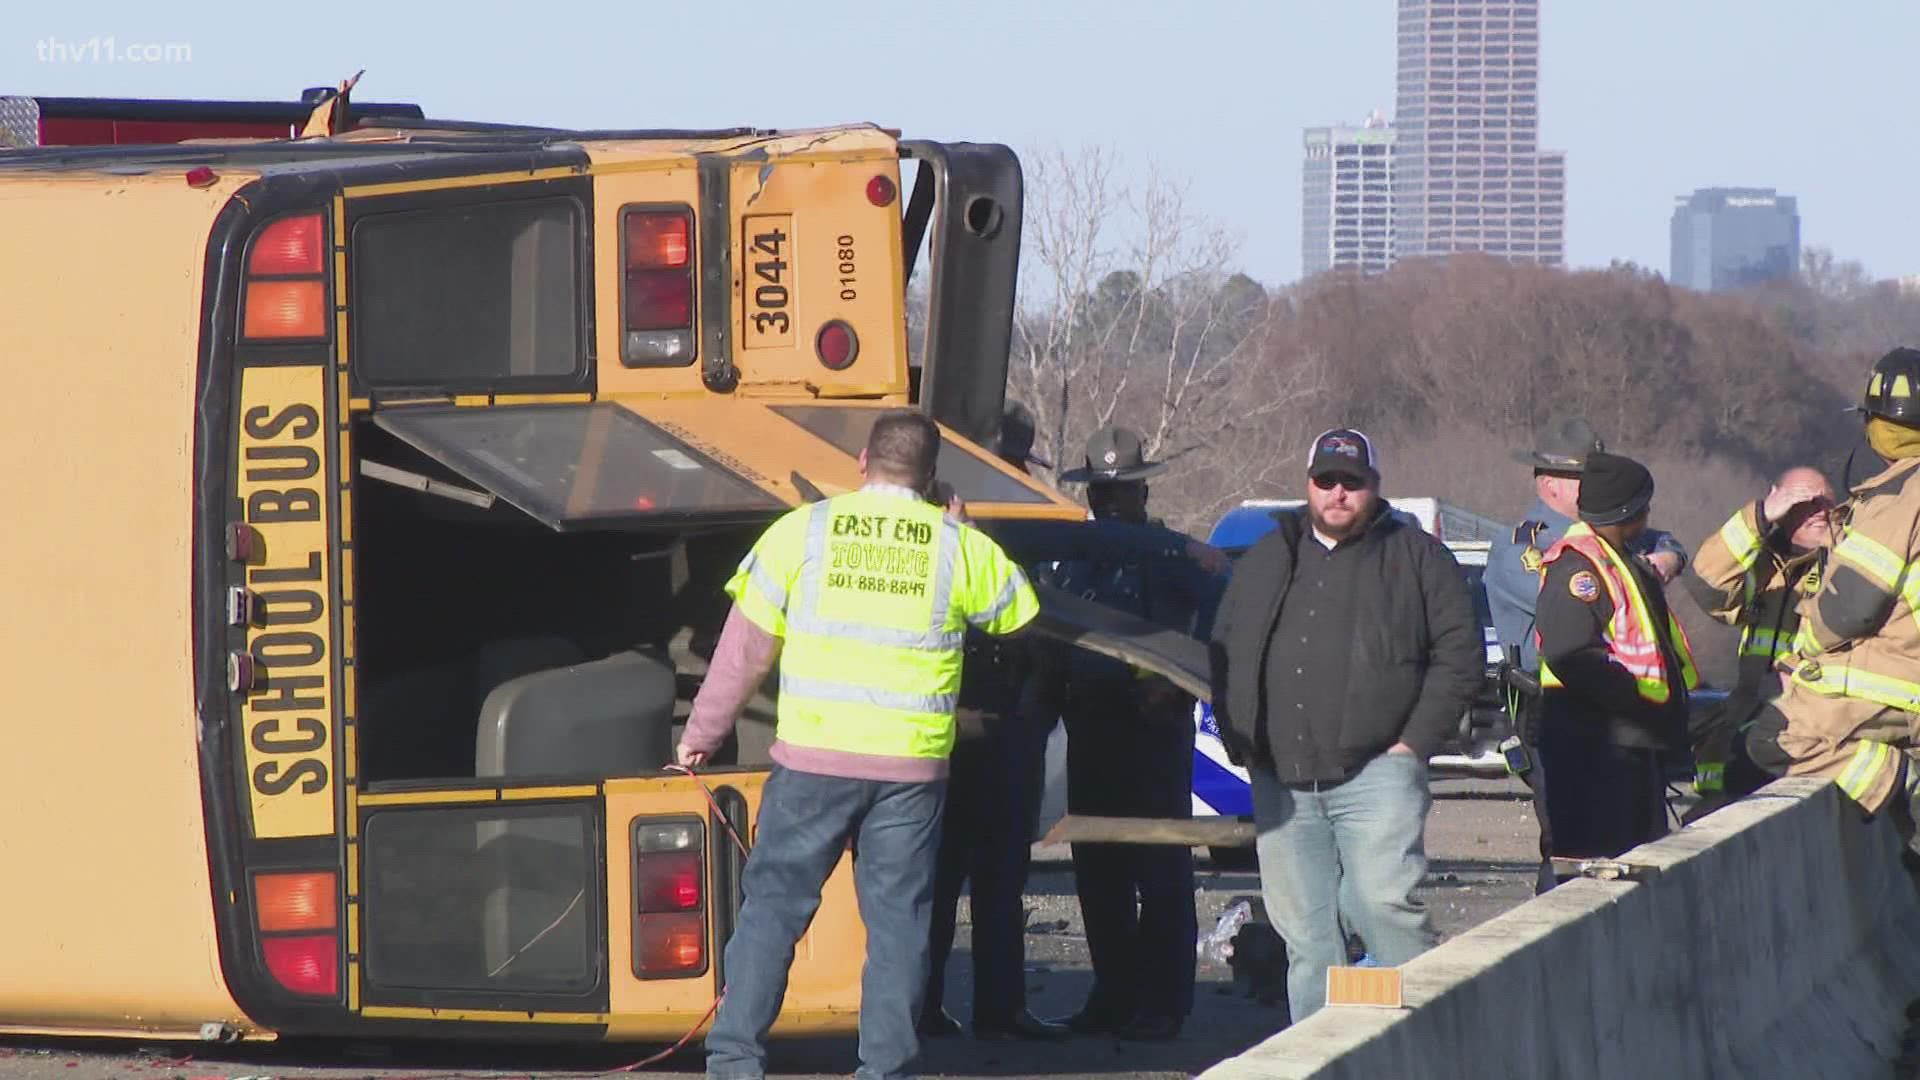 ARDOT responded to a 'major accident' on I-30 Friday that left a school bus on its side, bringing traffic to a standstill.